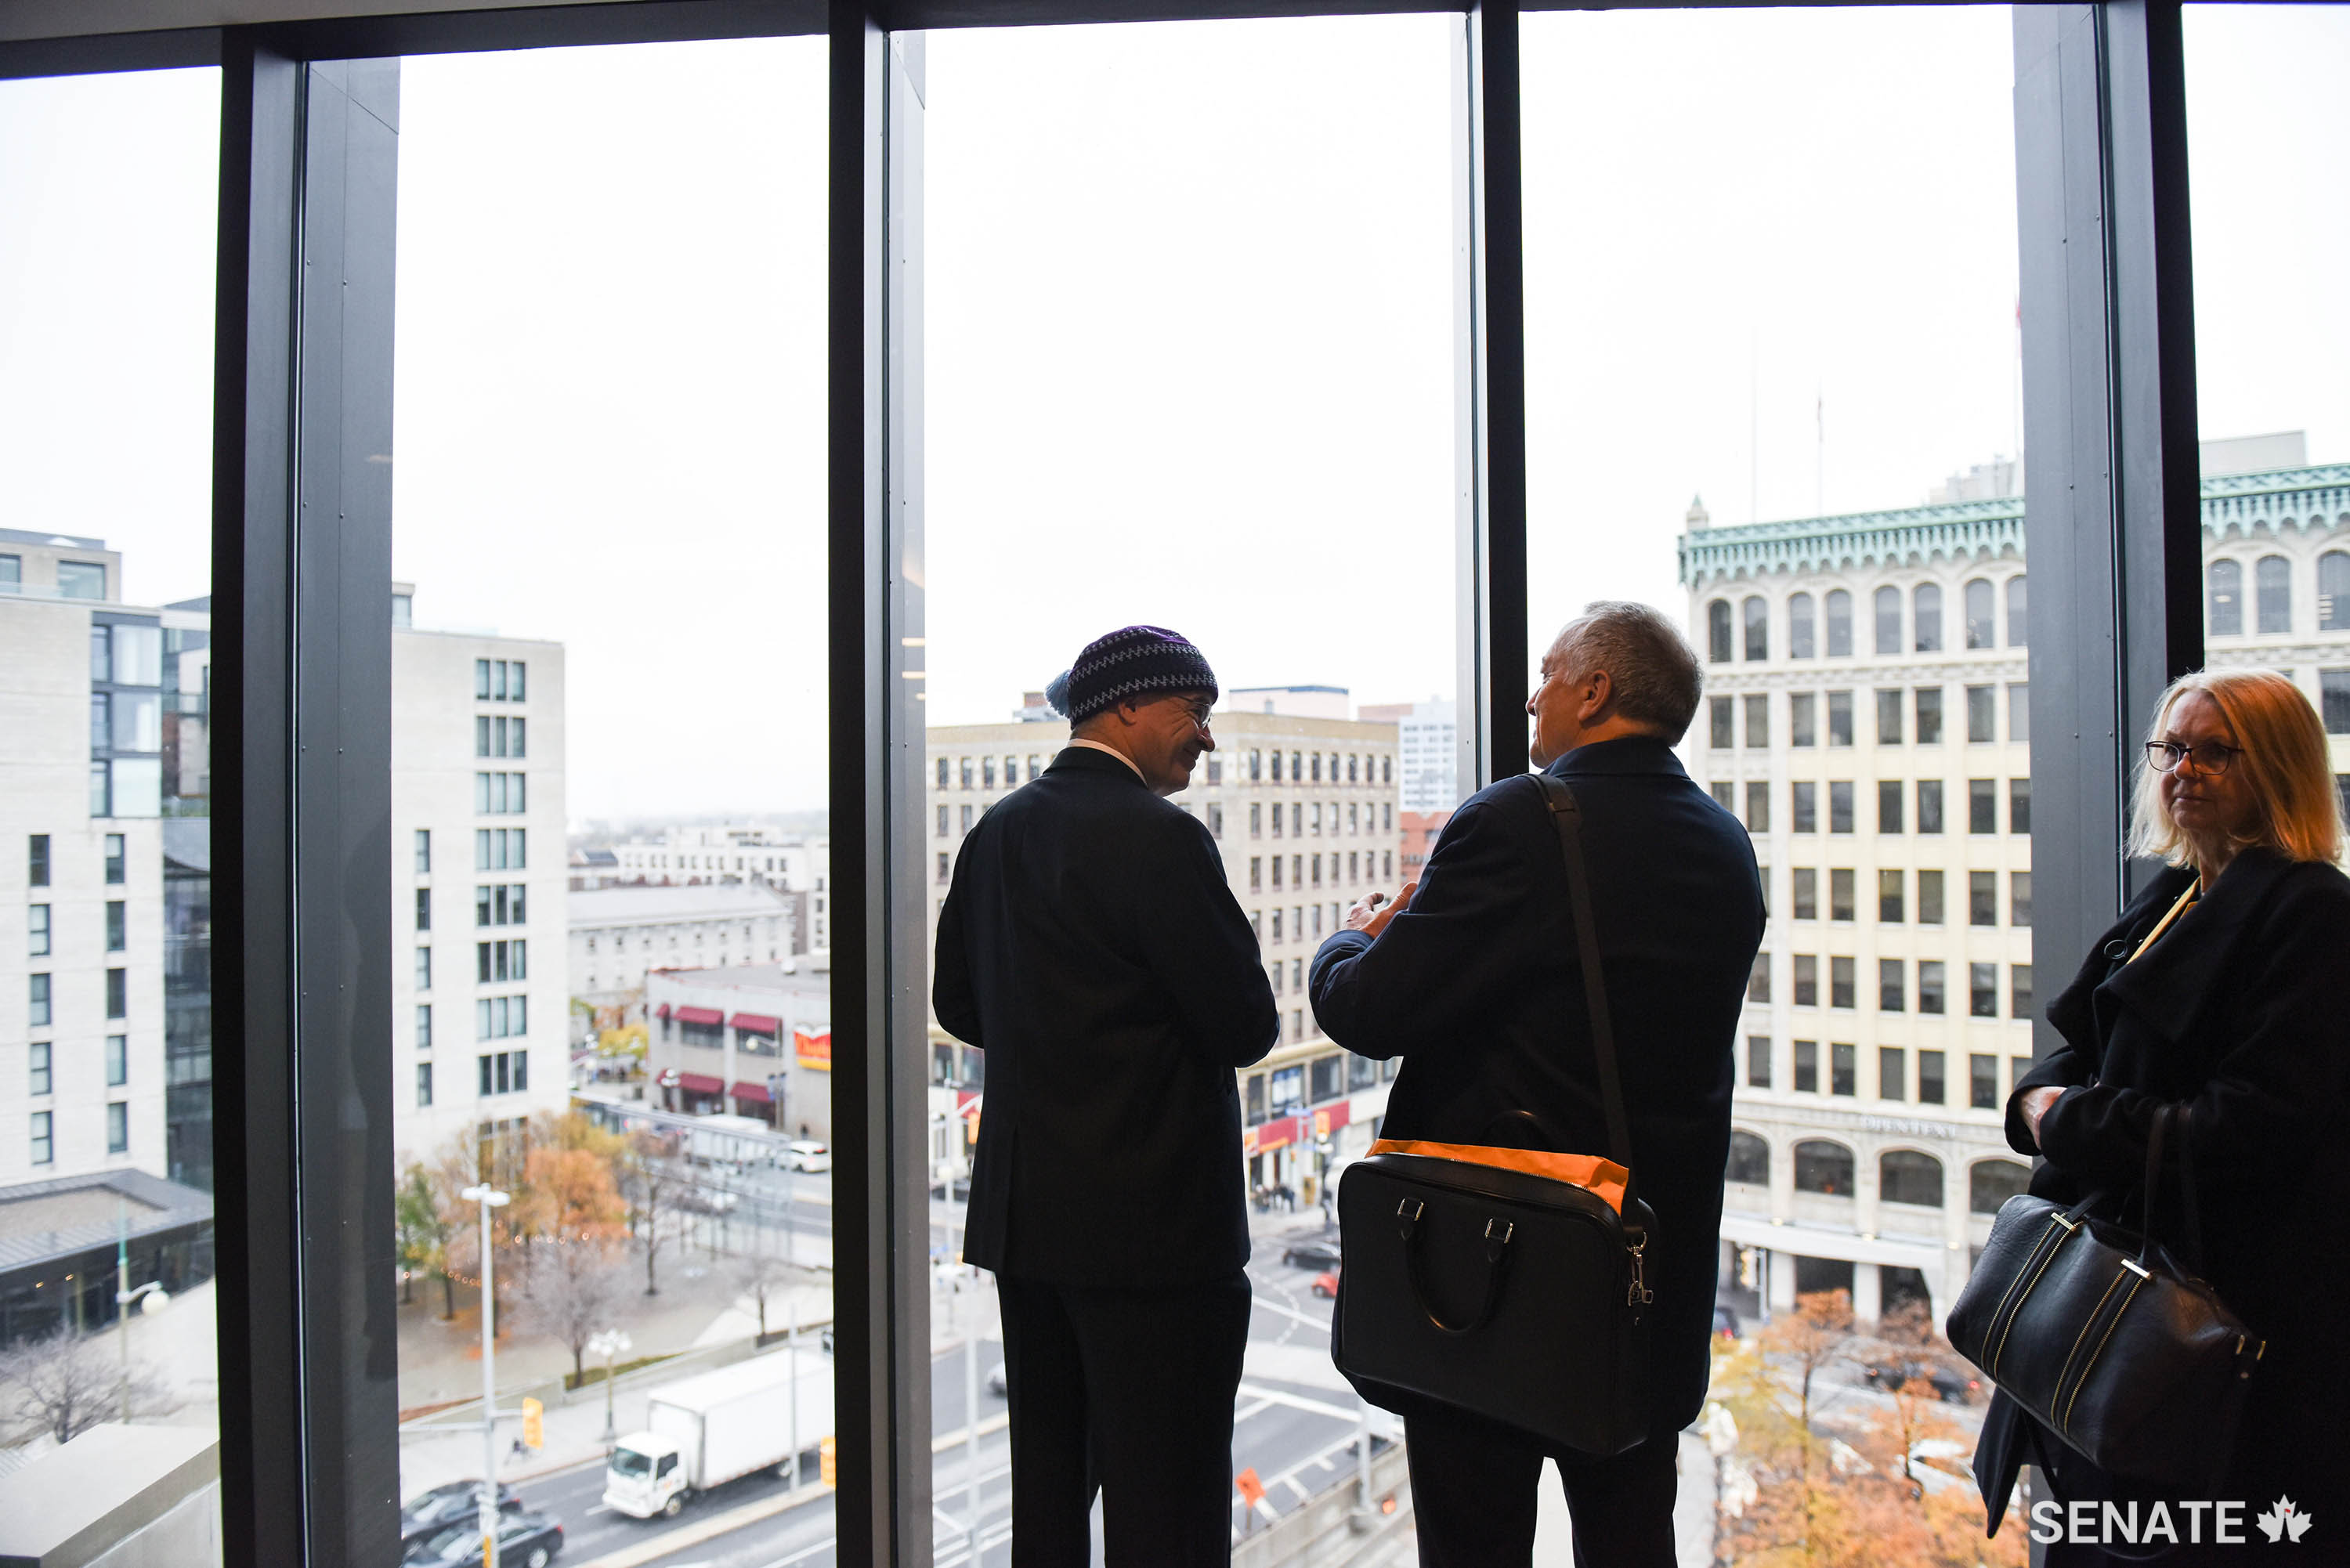 Senators Patterson and Massicotte take in views of the intersection of Rideau Street and Sussex Drive through windows designed to keep drafts out and treated air in, optimizing the Senate of Canada Building’s heating and cooling system.